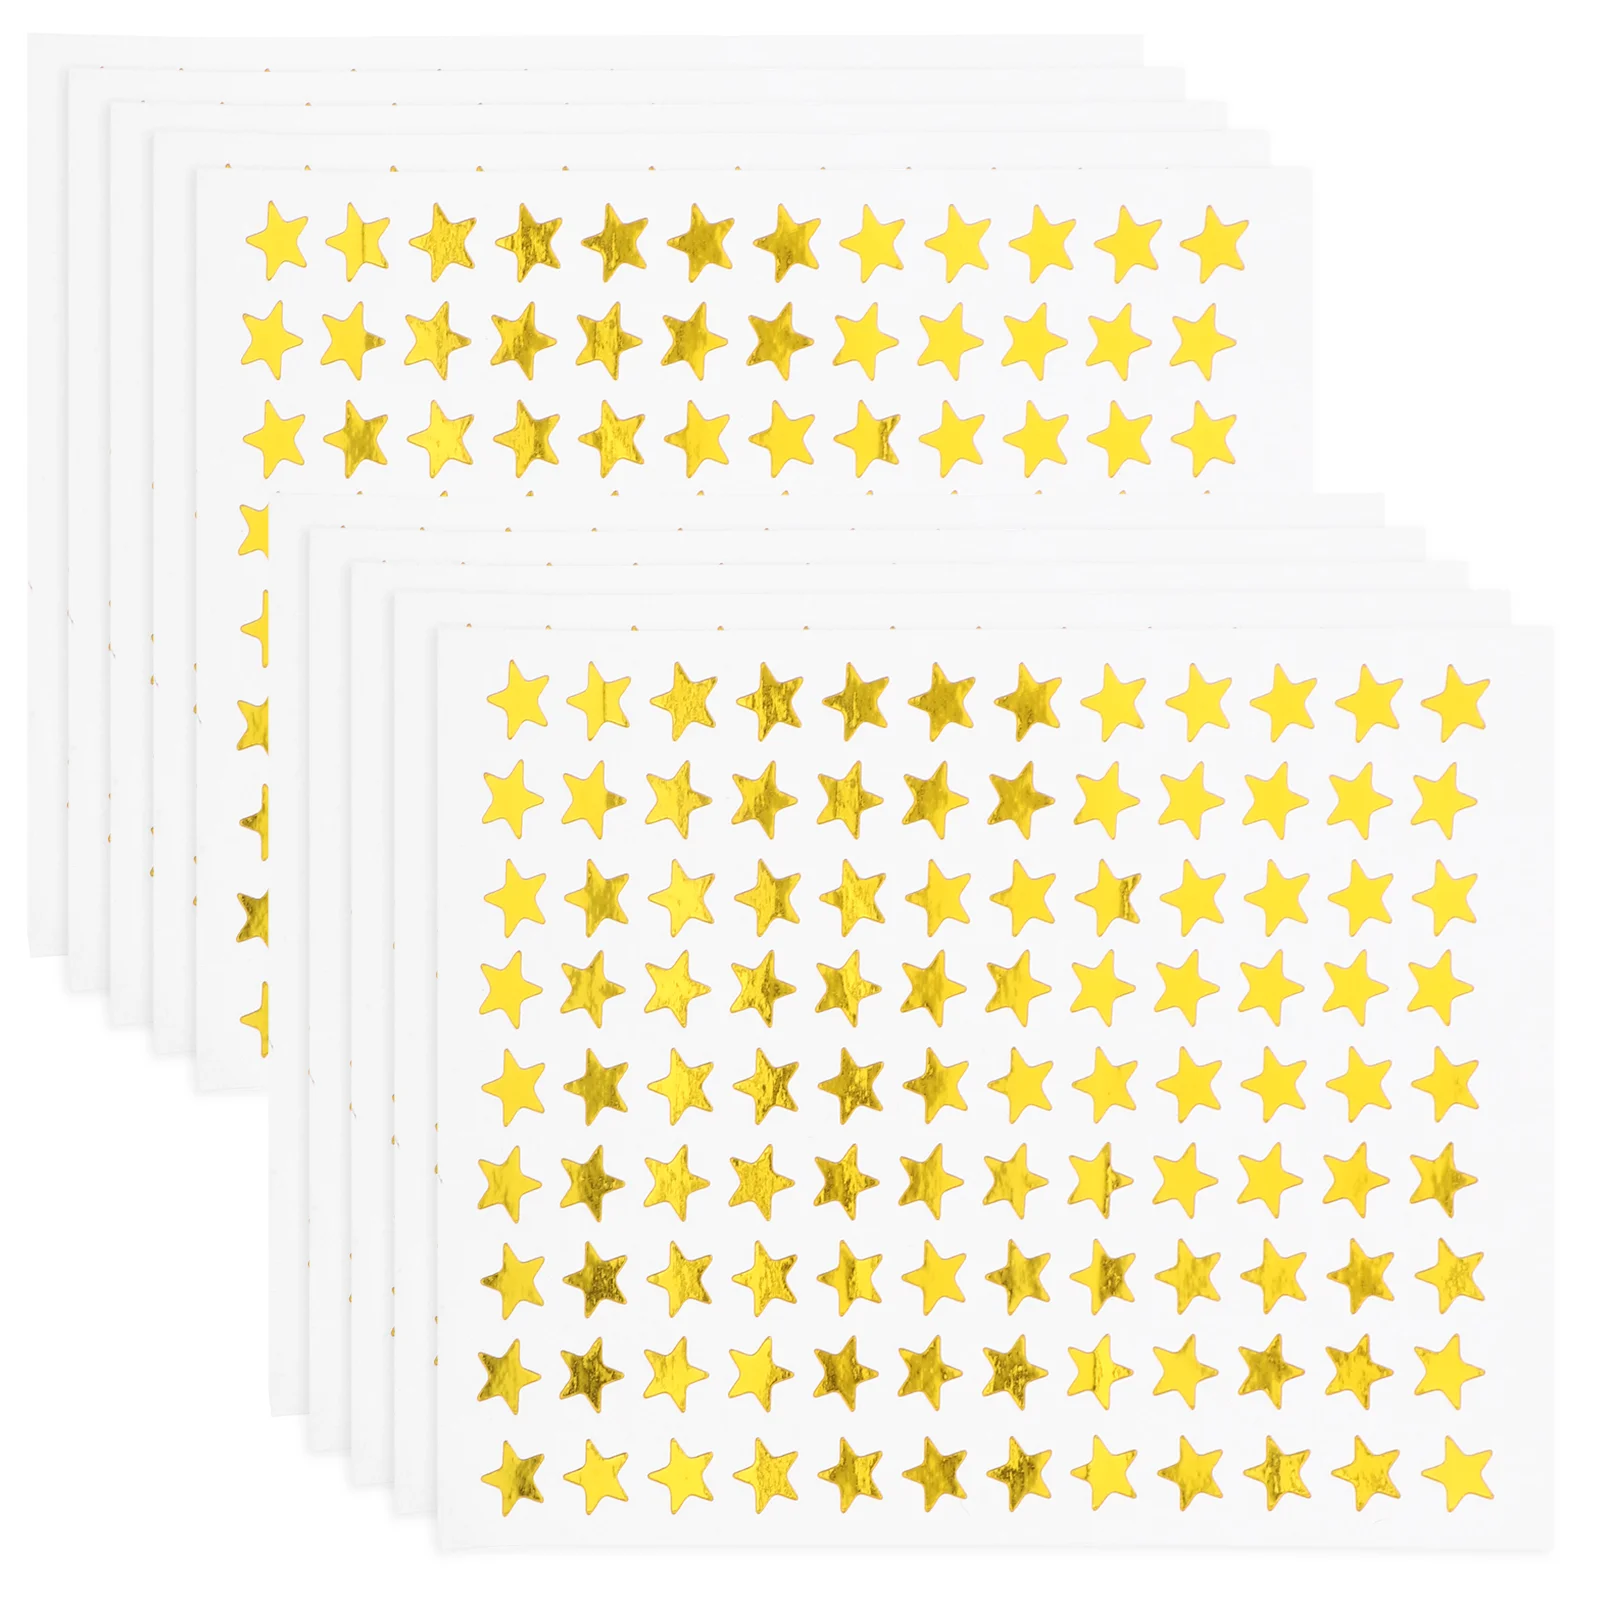 

100 Sheets Star Stickers Pentagram Decals Incentive Self-adhesive Label Removable Motivational Prints Decors